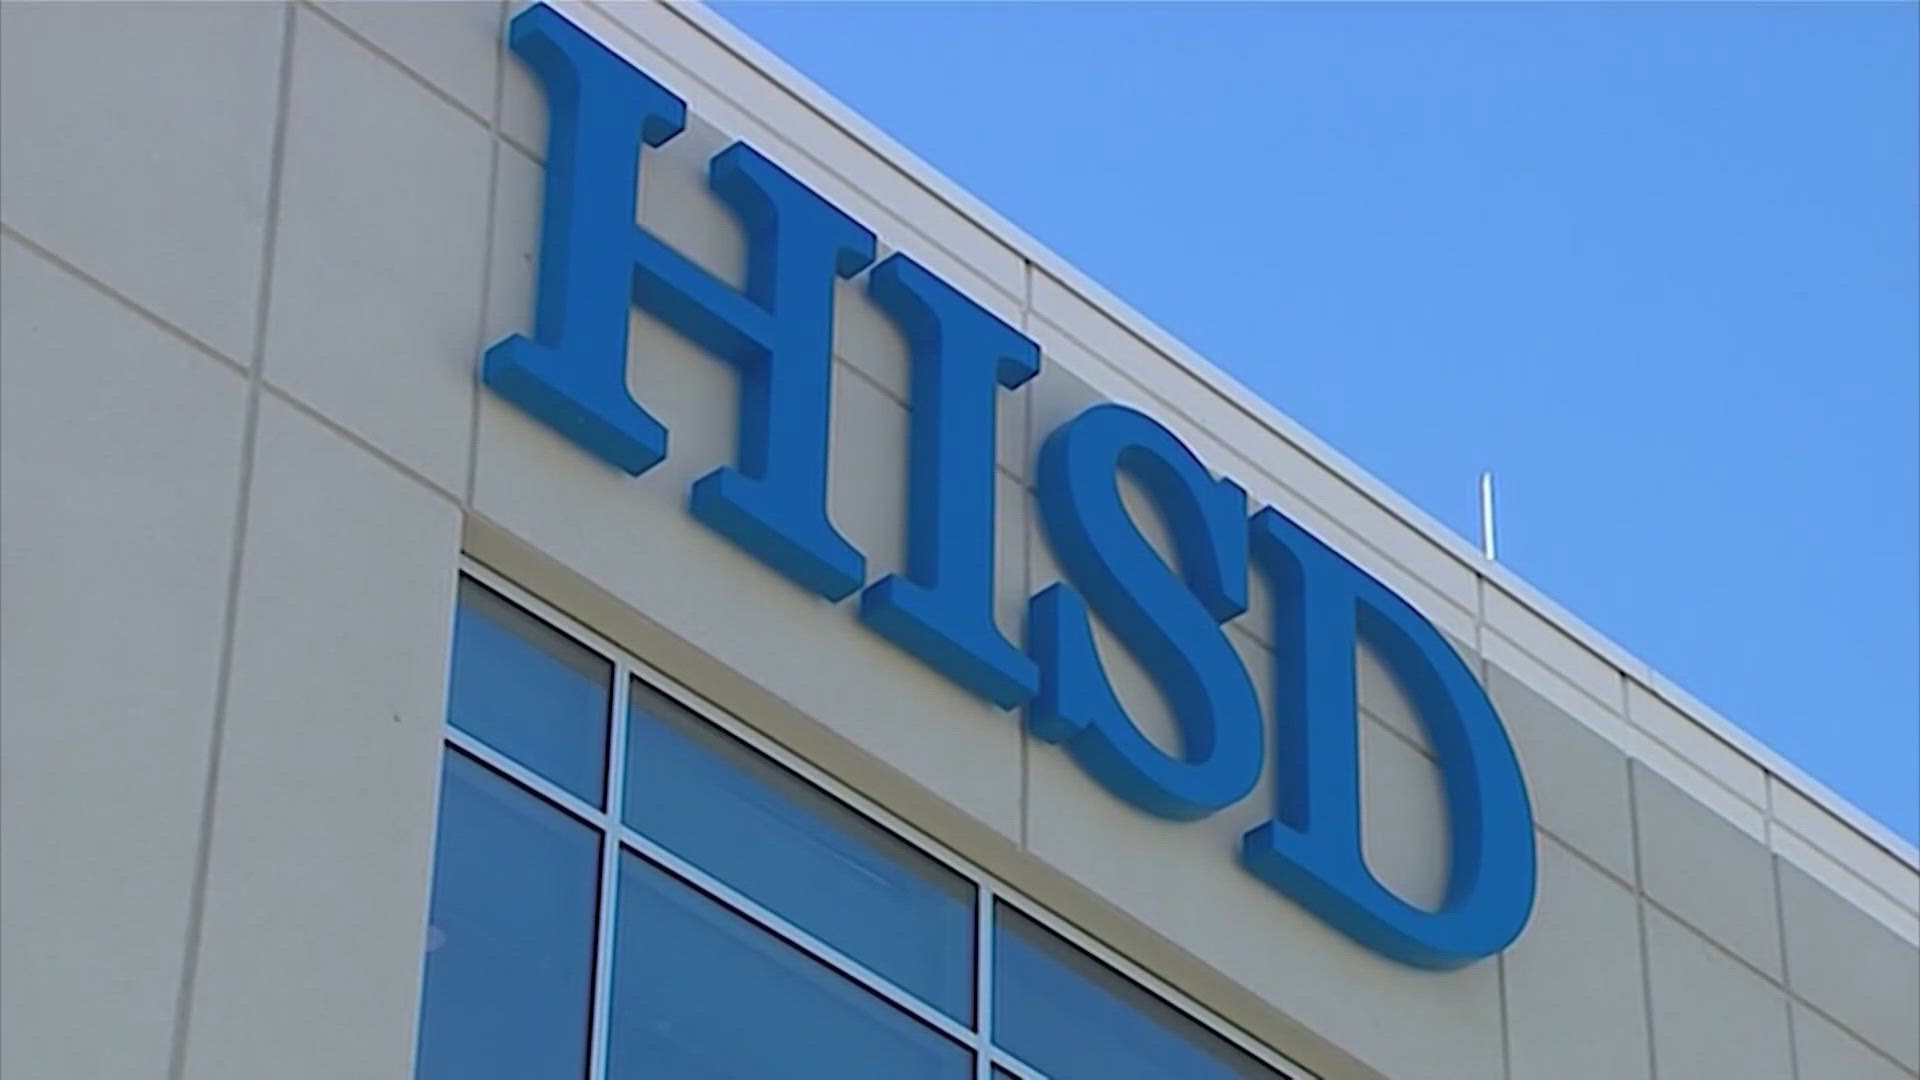 Nine state representatives from the Houston area requested a special hearing and investigation into HISD and how the board is handling the state takeover.